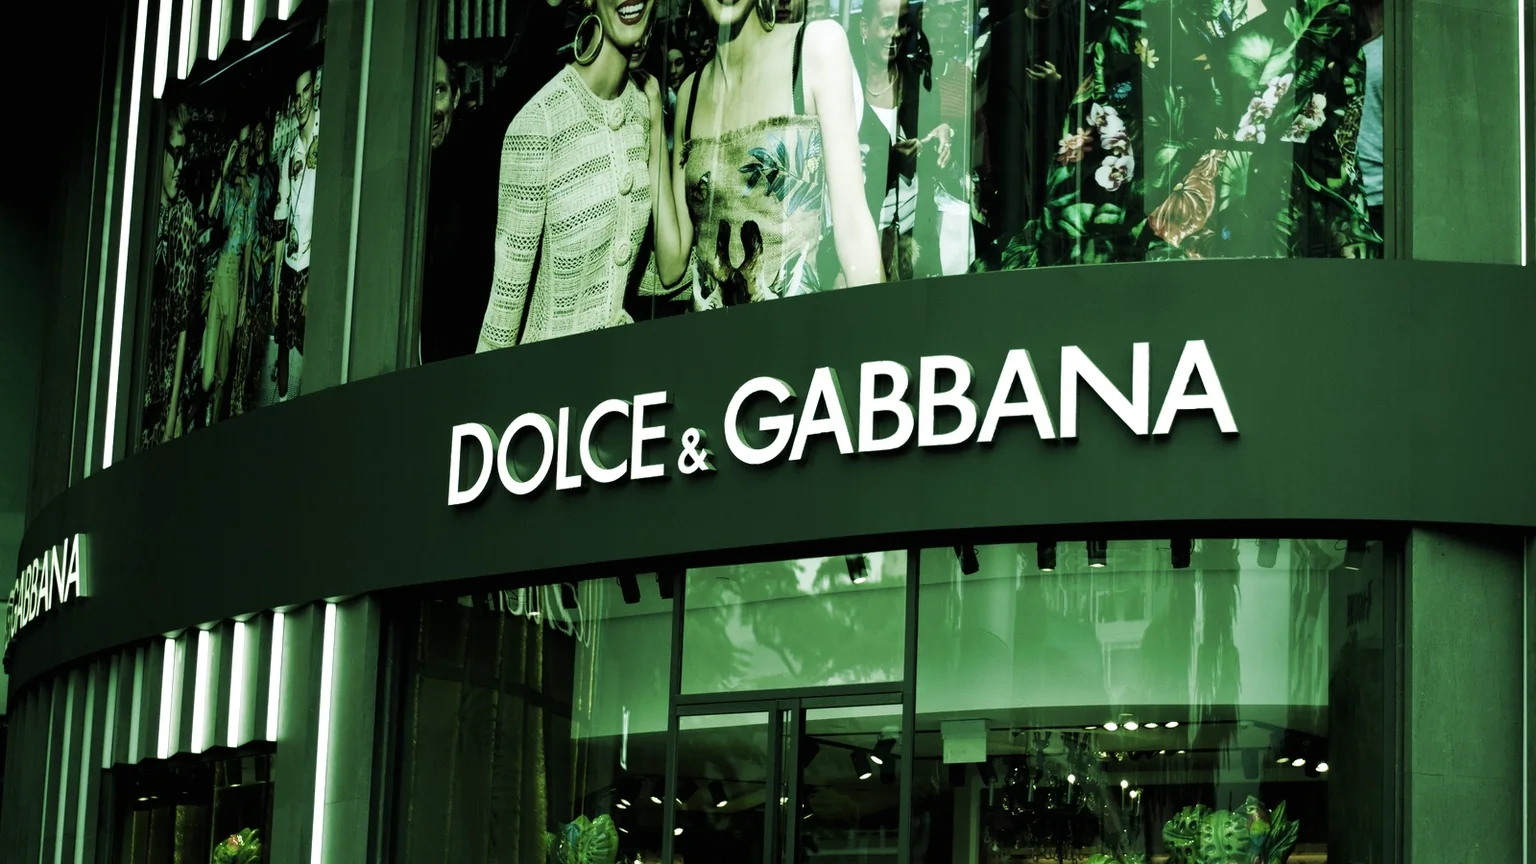 Dolce & Gabbana boutique in the mall, Singapore. Image: Shutterstock